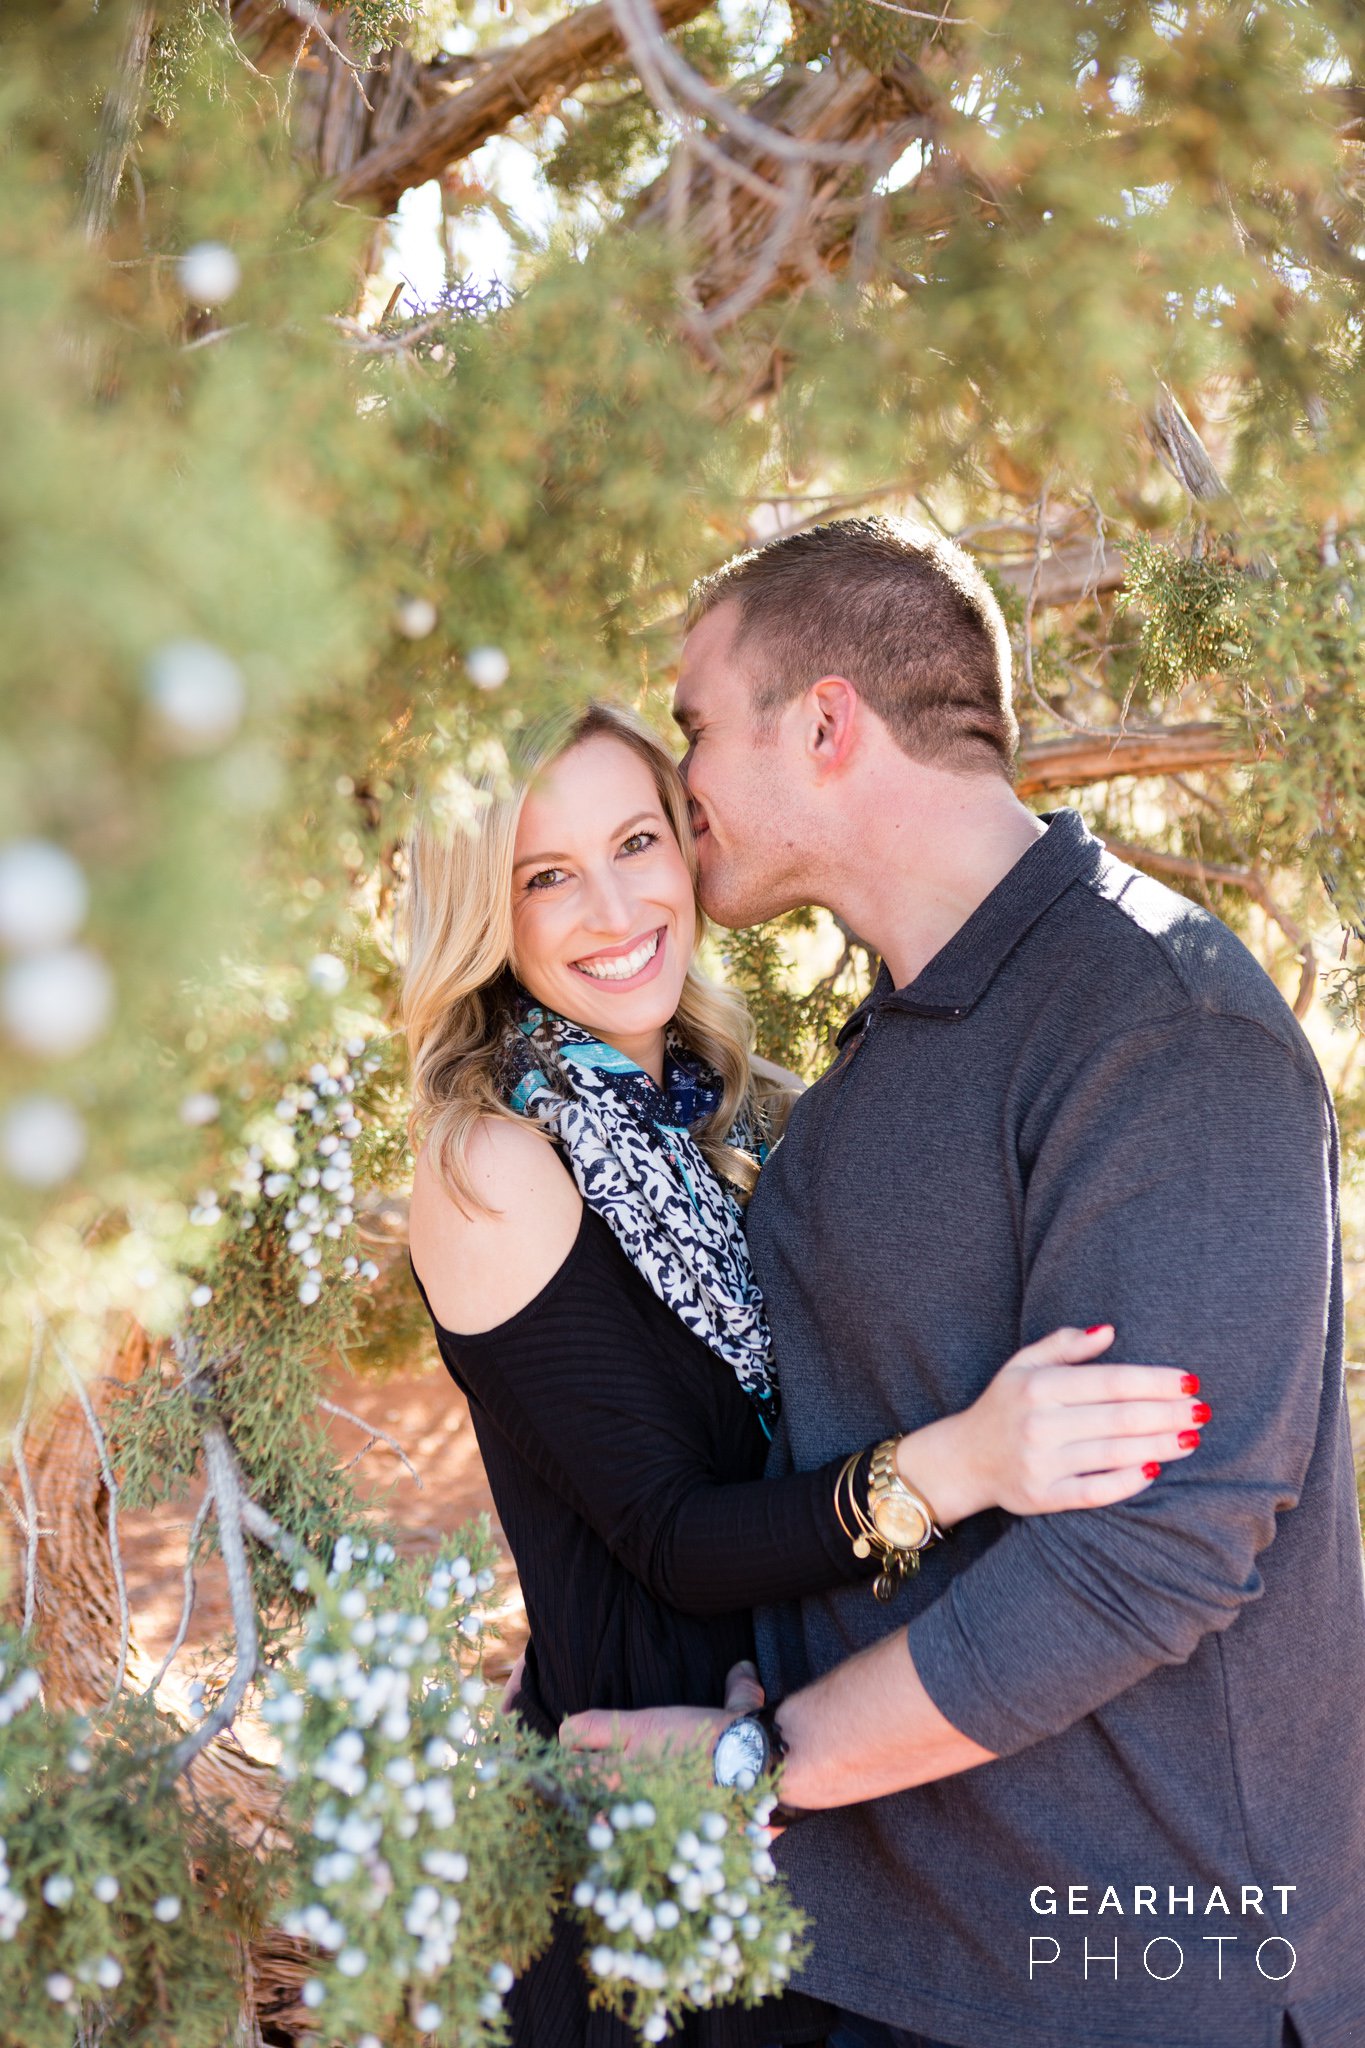 Christmas Day Proposal in St. George, Utah - Engagements in Snow Canyon - Gearhart Photo: St.George Wedding Photographer